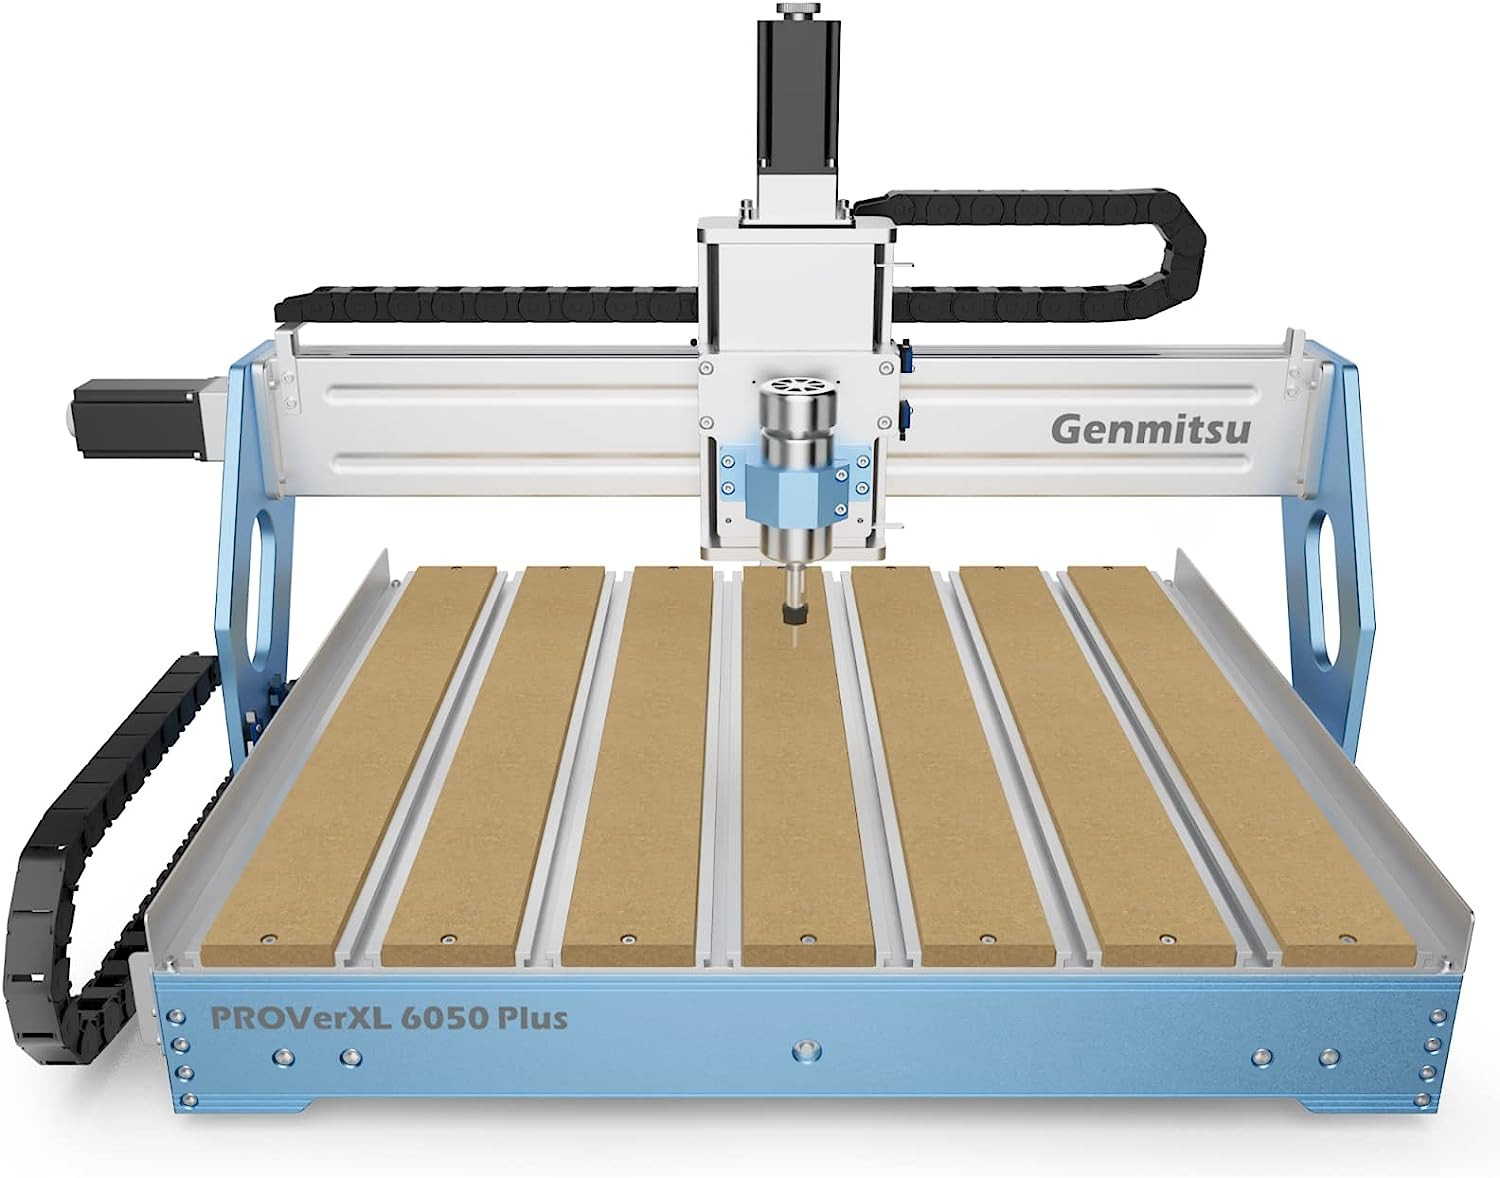 Genmitsu CNC Machine PROVerXL 6050 Plus for Metal Wood Acrylic MDF Carving, GRBL Control, 3 Axis Milling CNC Router Machine, Hybrid Table, Working Are